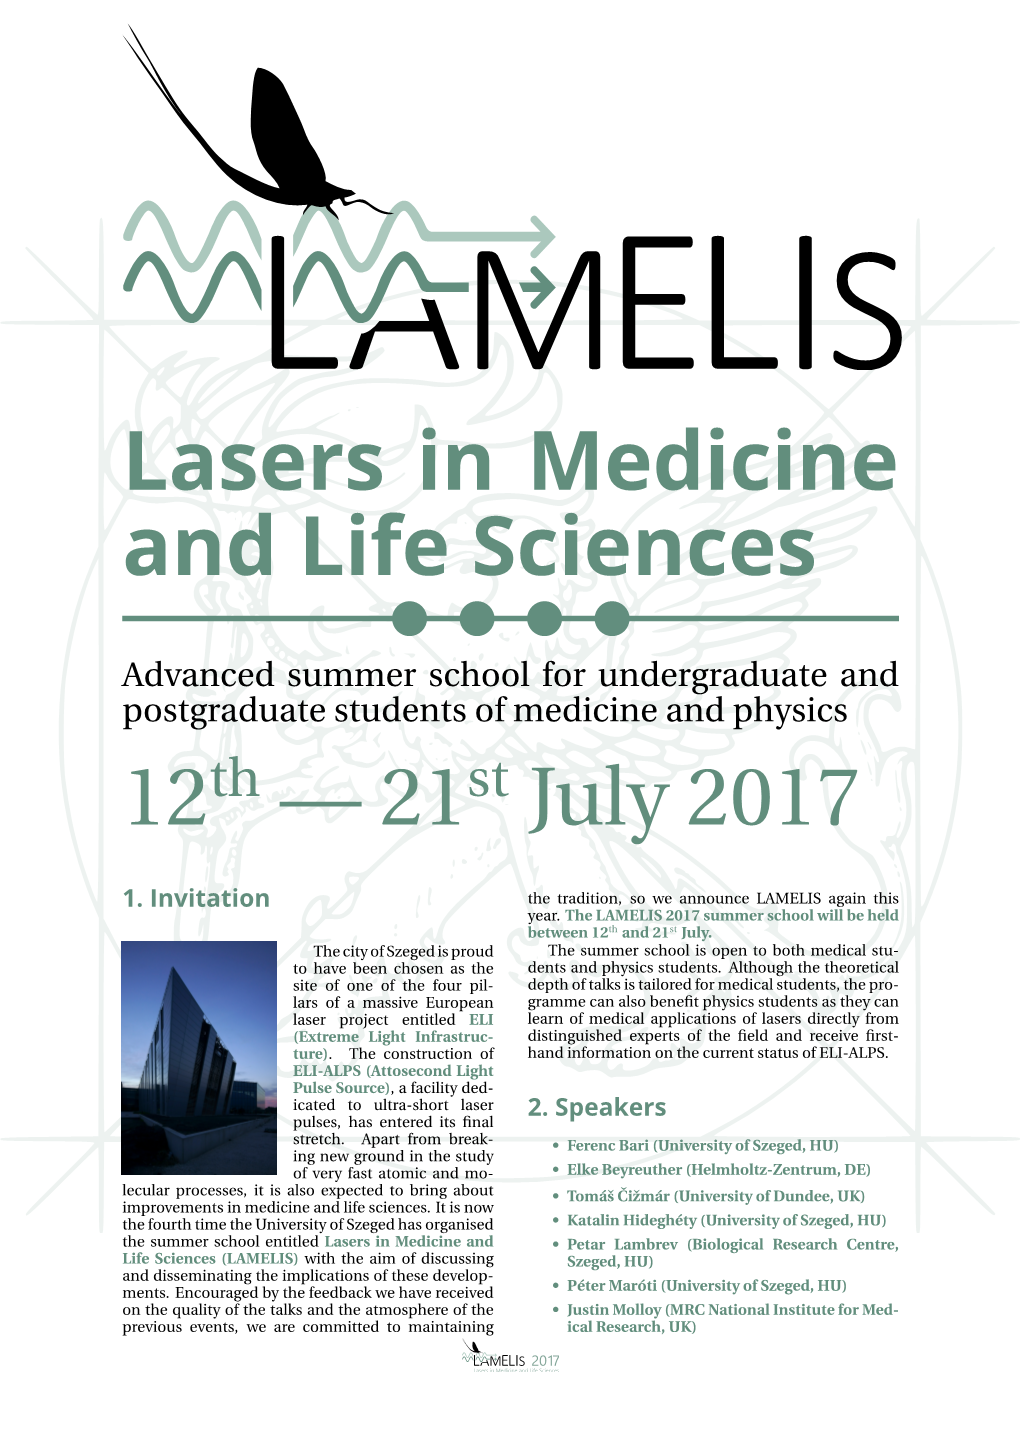 Lasers in Medicine and Life Sciences 12 — 21 July 2017